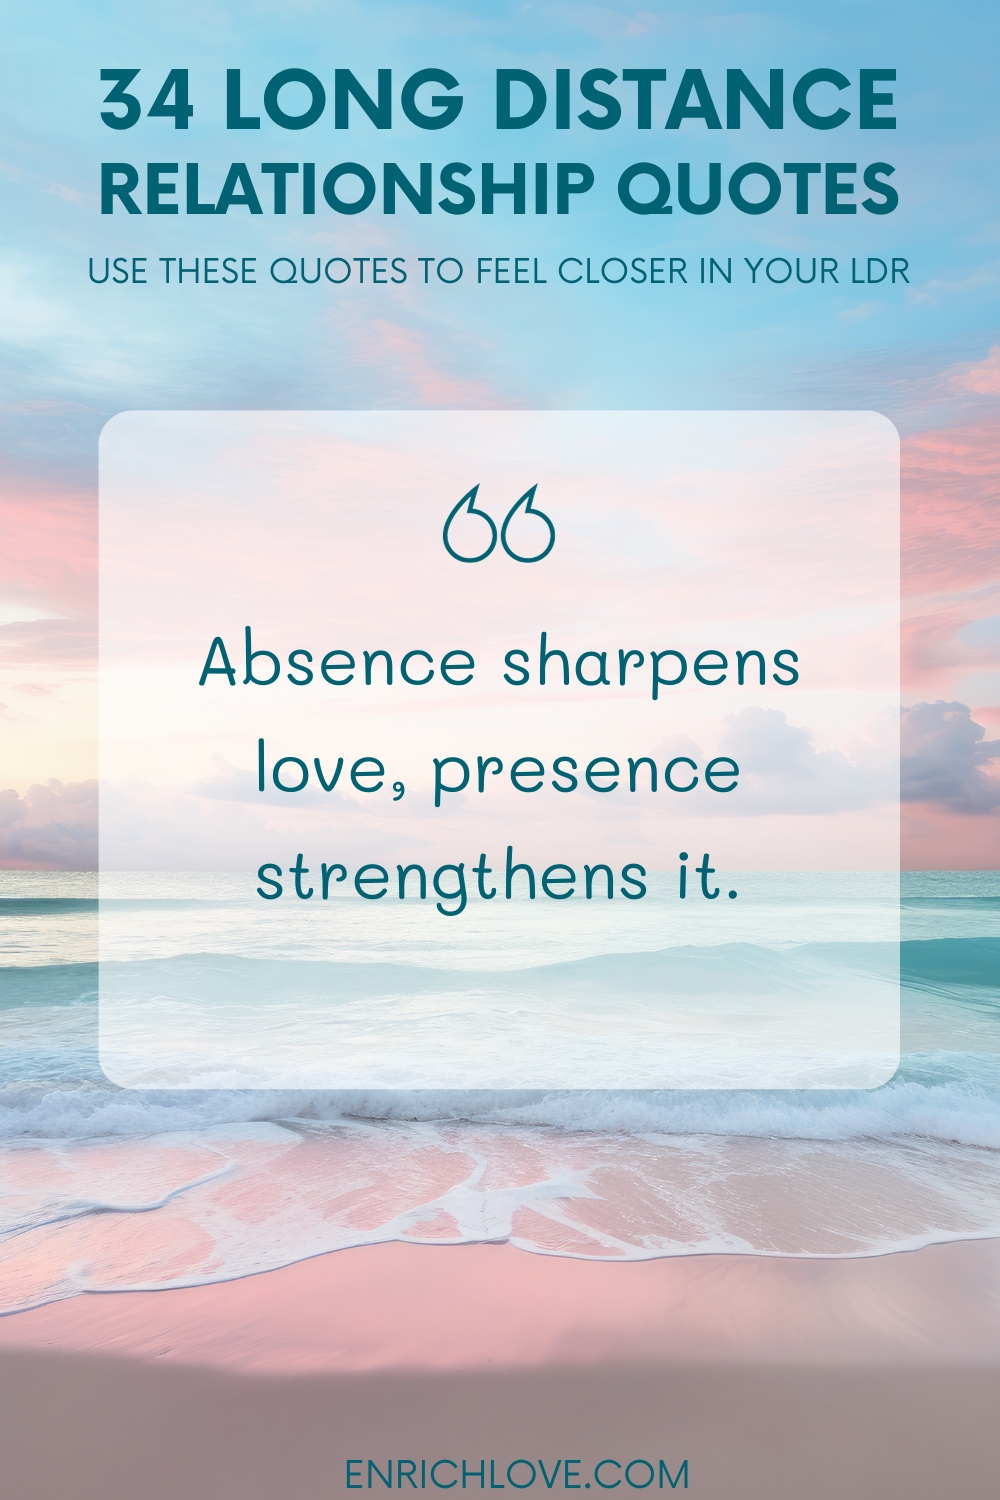 34 Long Distance Relationship Quotes - Absence sharpens love, presence strengthens it.